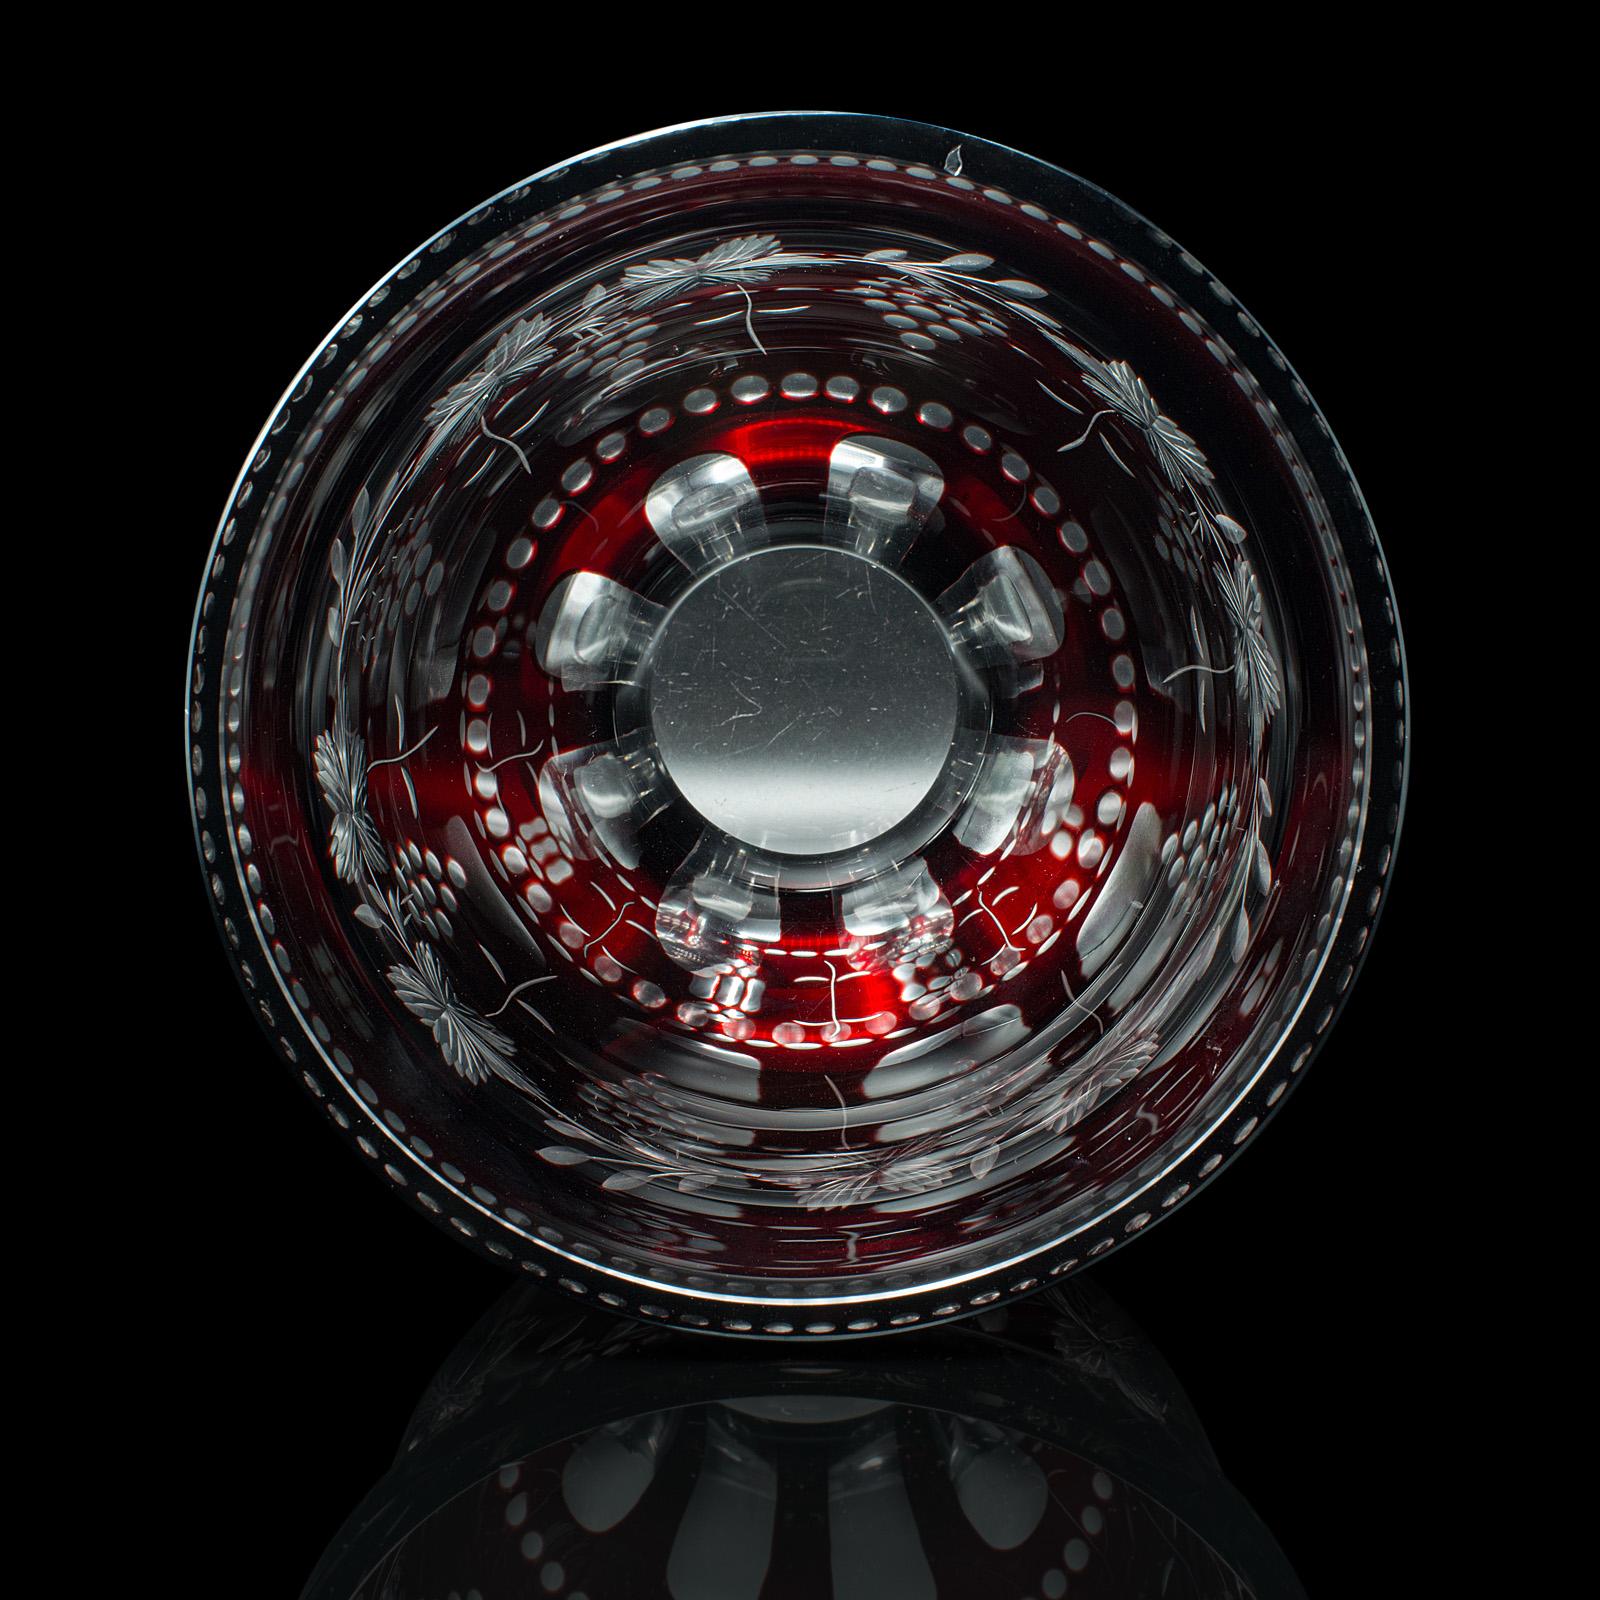 Antique Ruby Pedestal Bowl, Continental, Glass, Decorative Ice Bucket, C.1920 For Sale 4